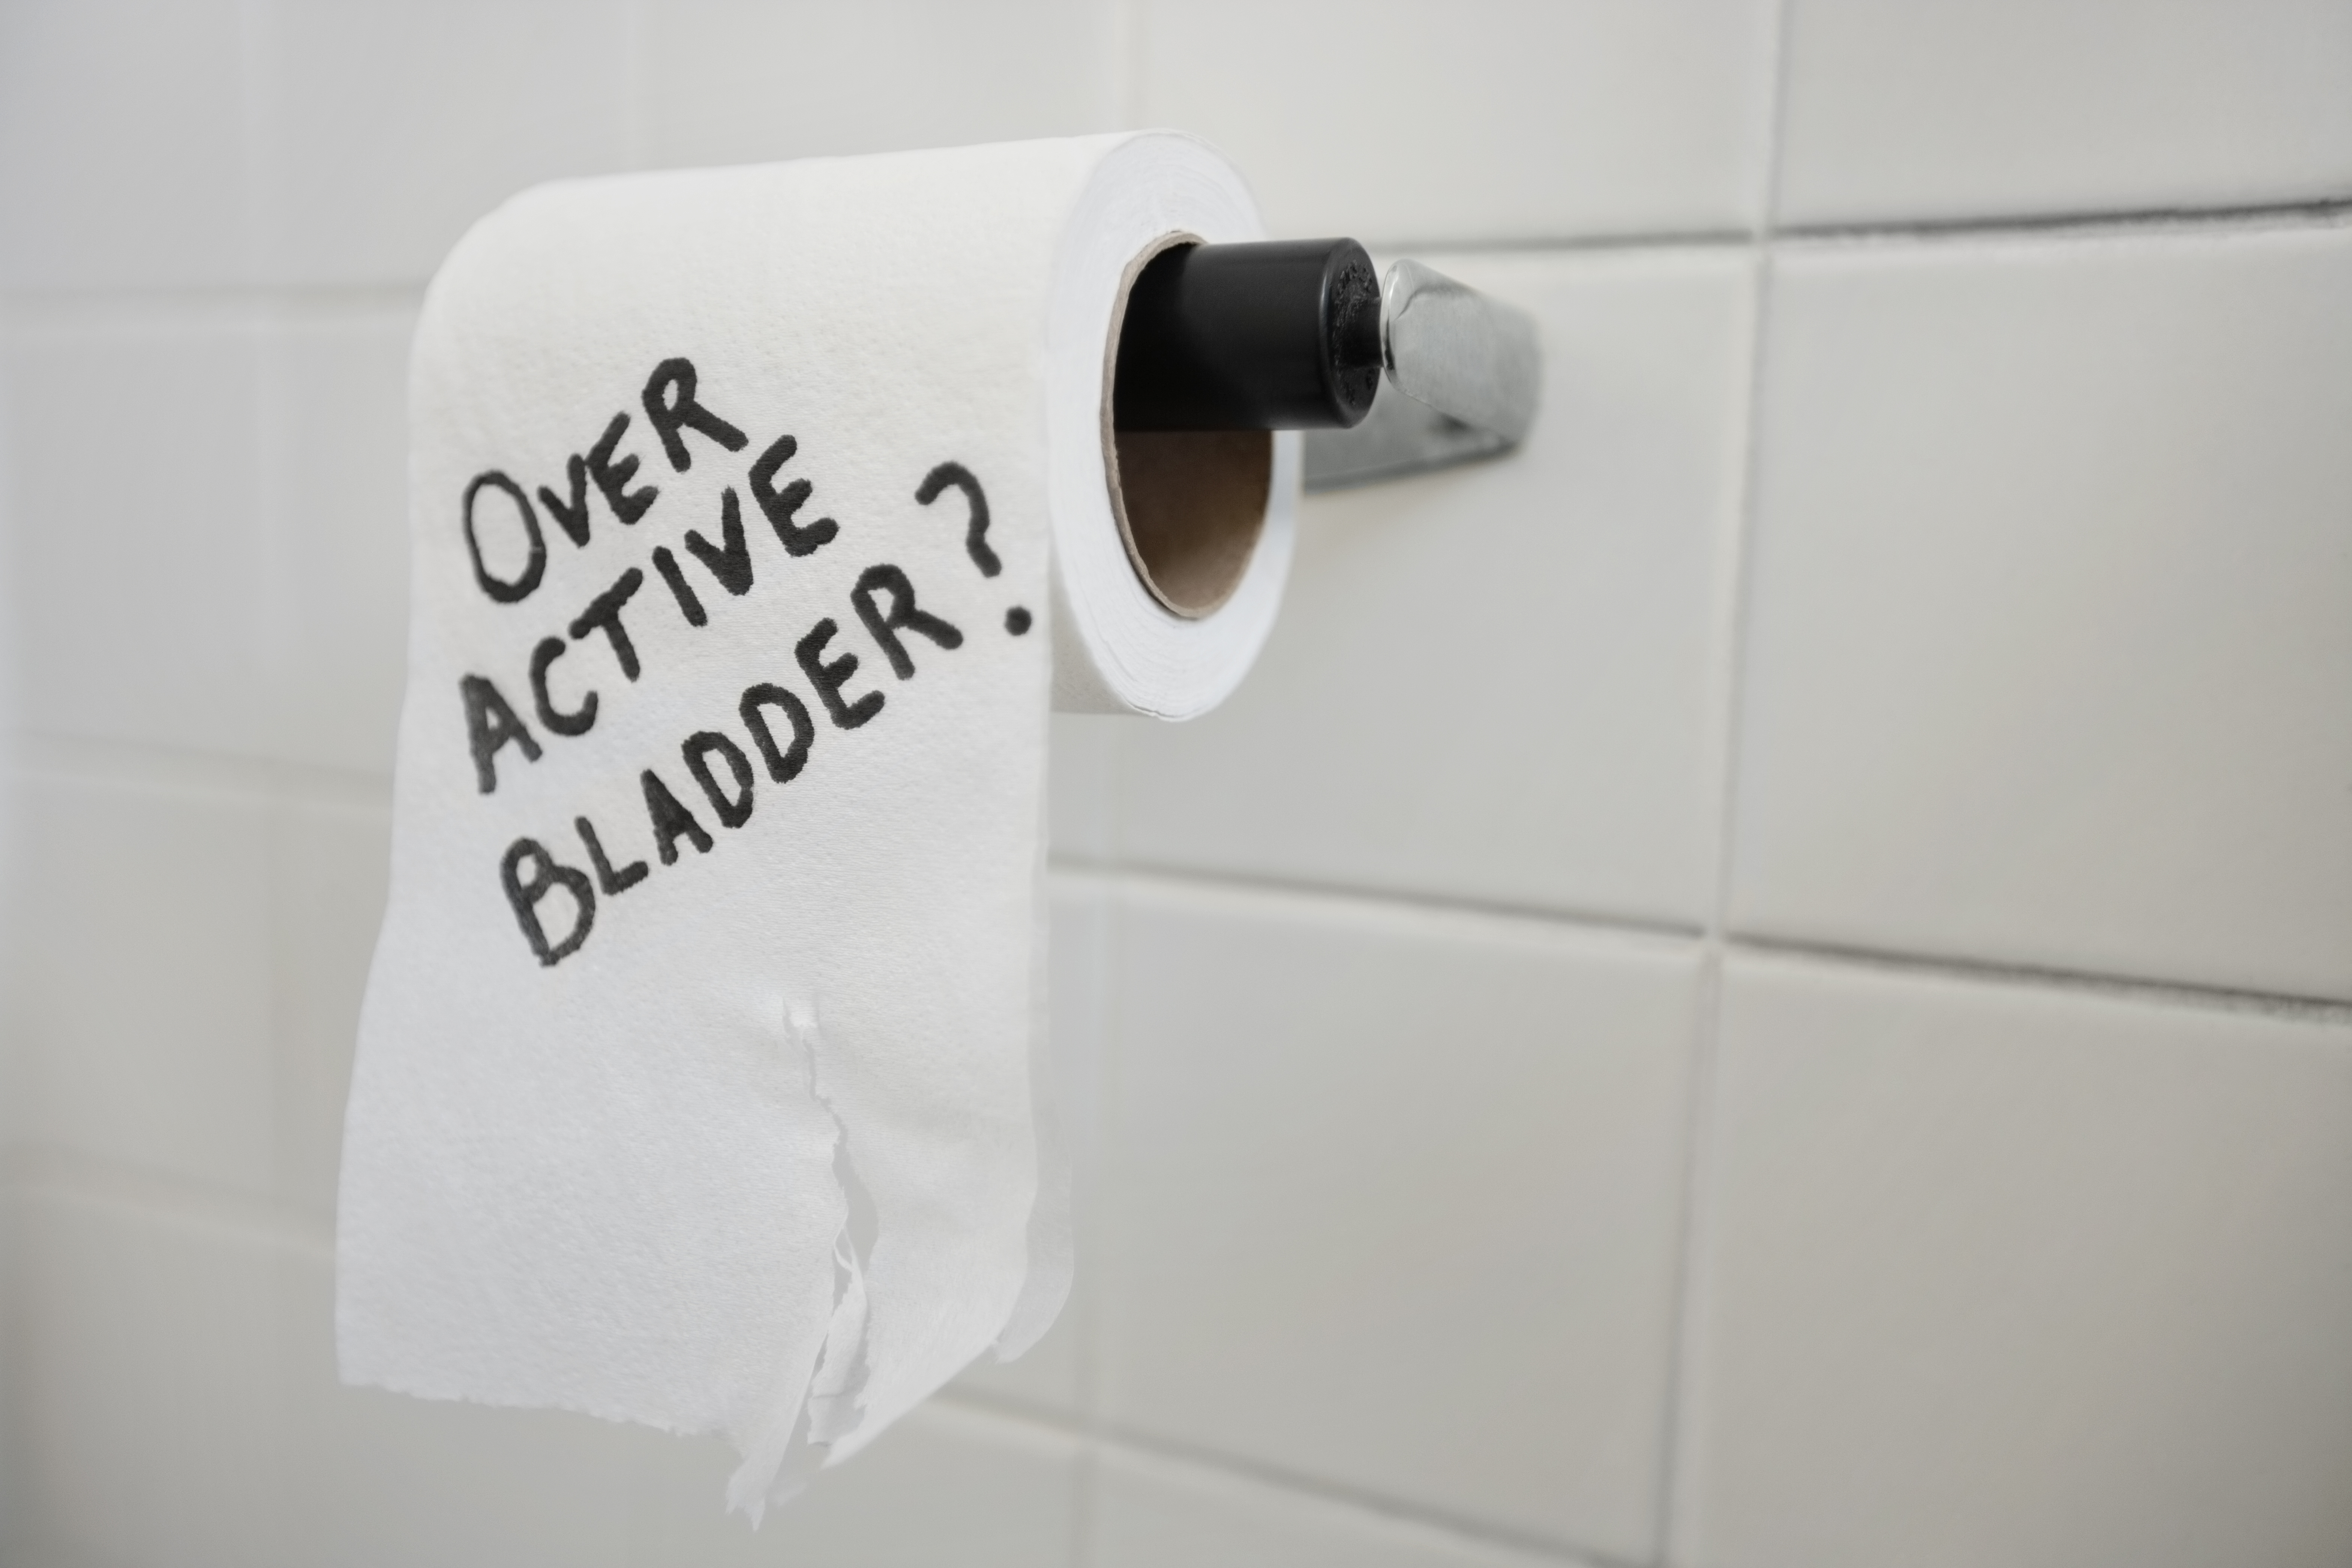 Close-up of toilet paper roll with text asking about bladder issues